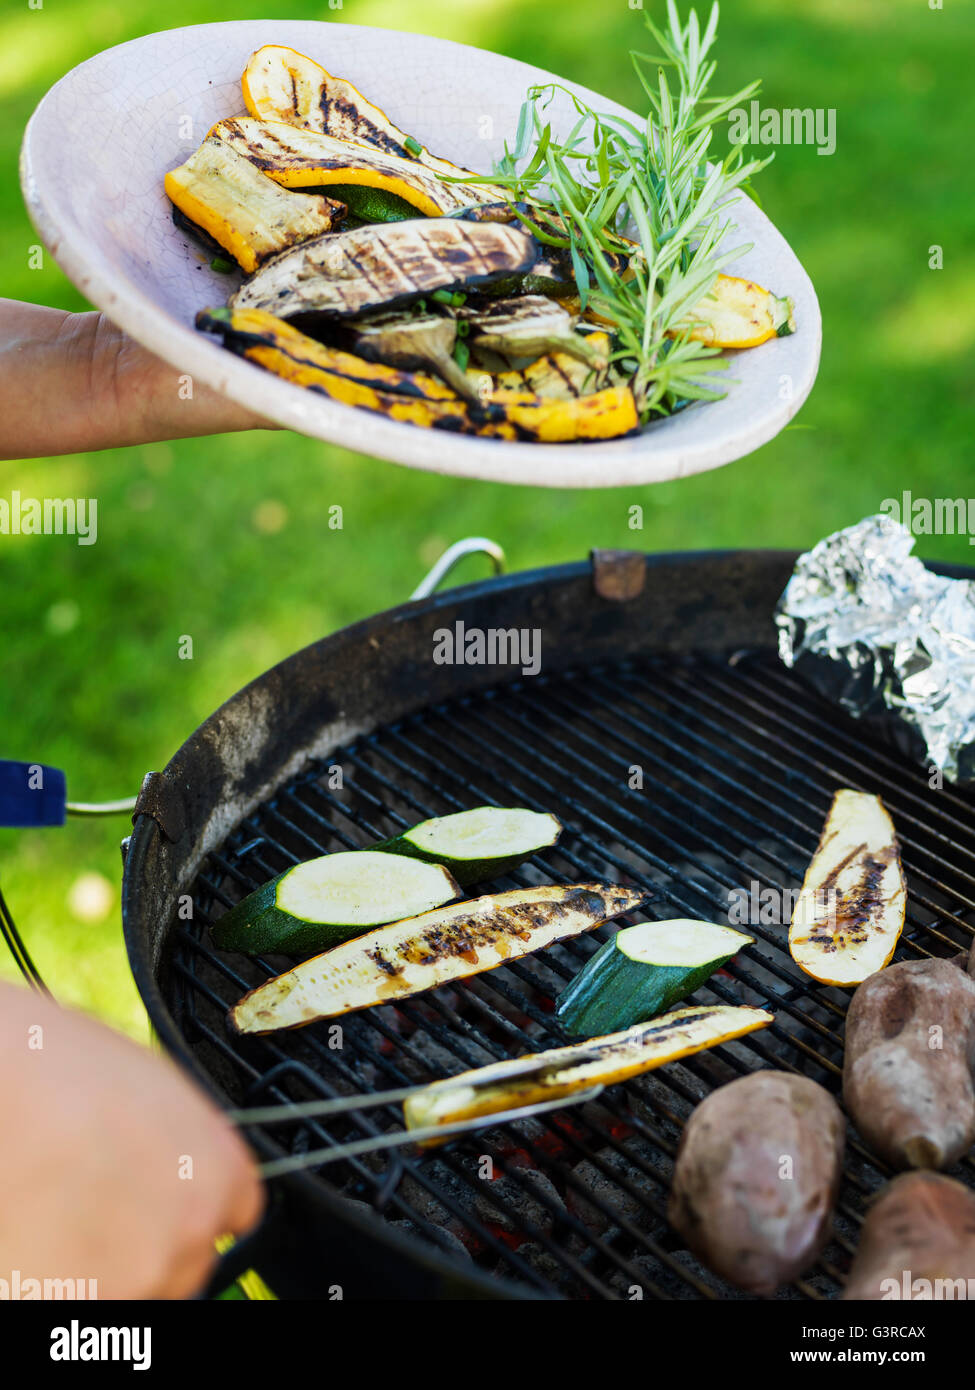 Sweden, Grilled vegetables on plate and grill Stock Photo